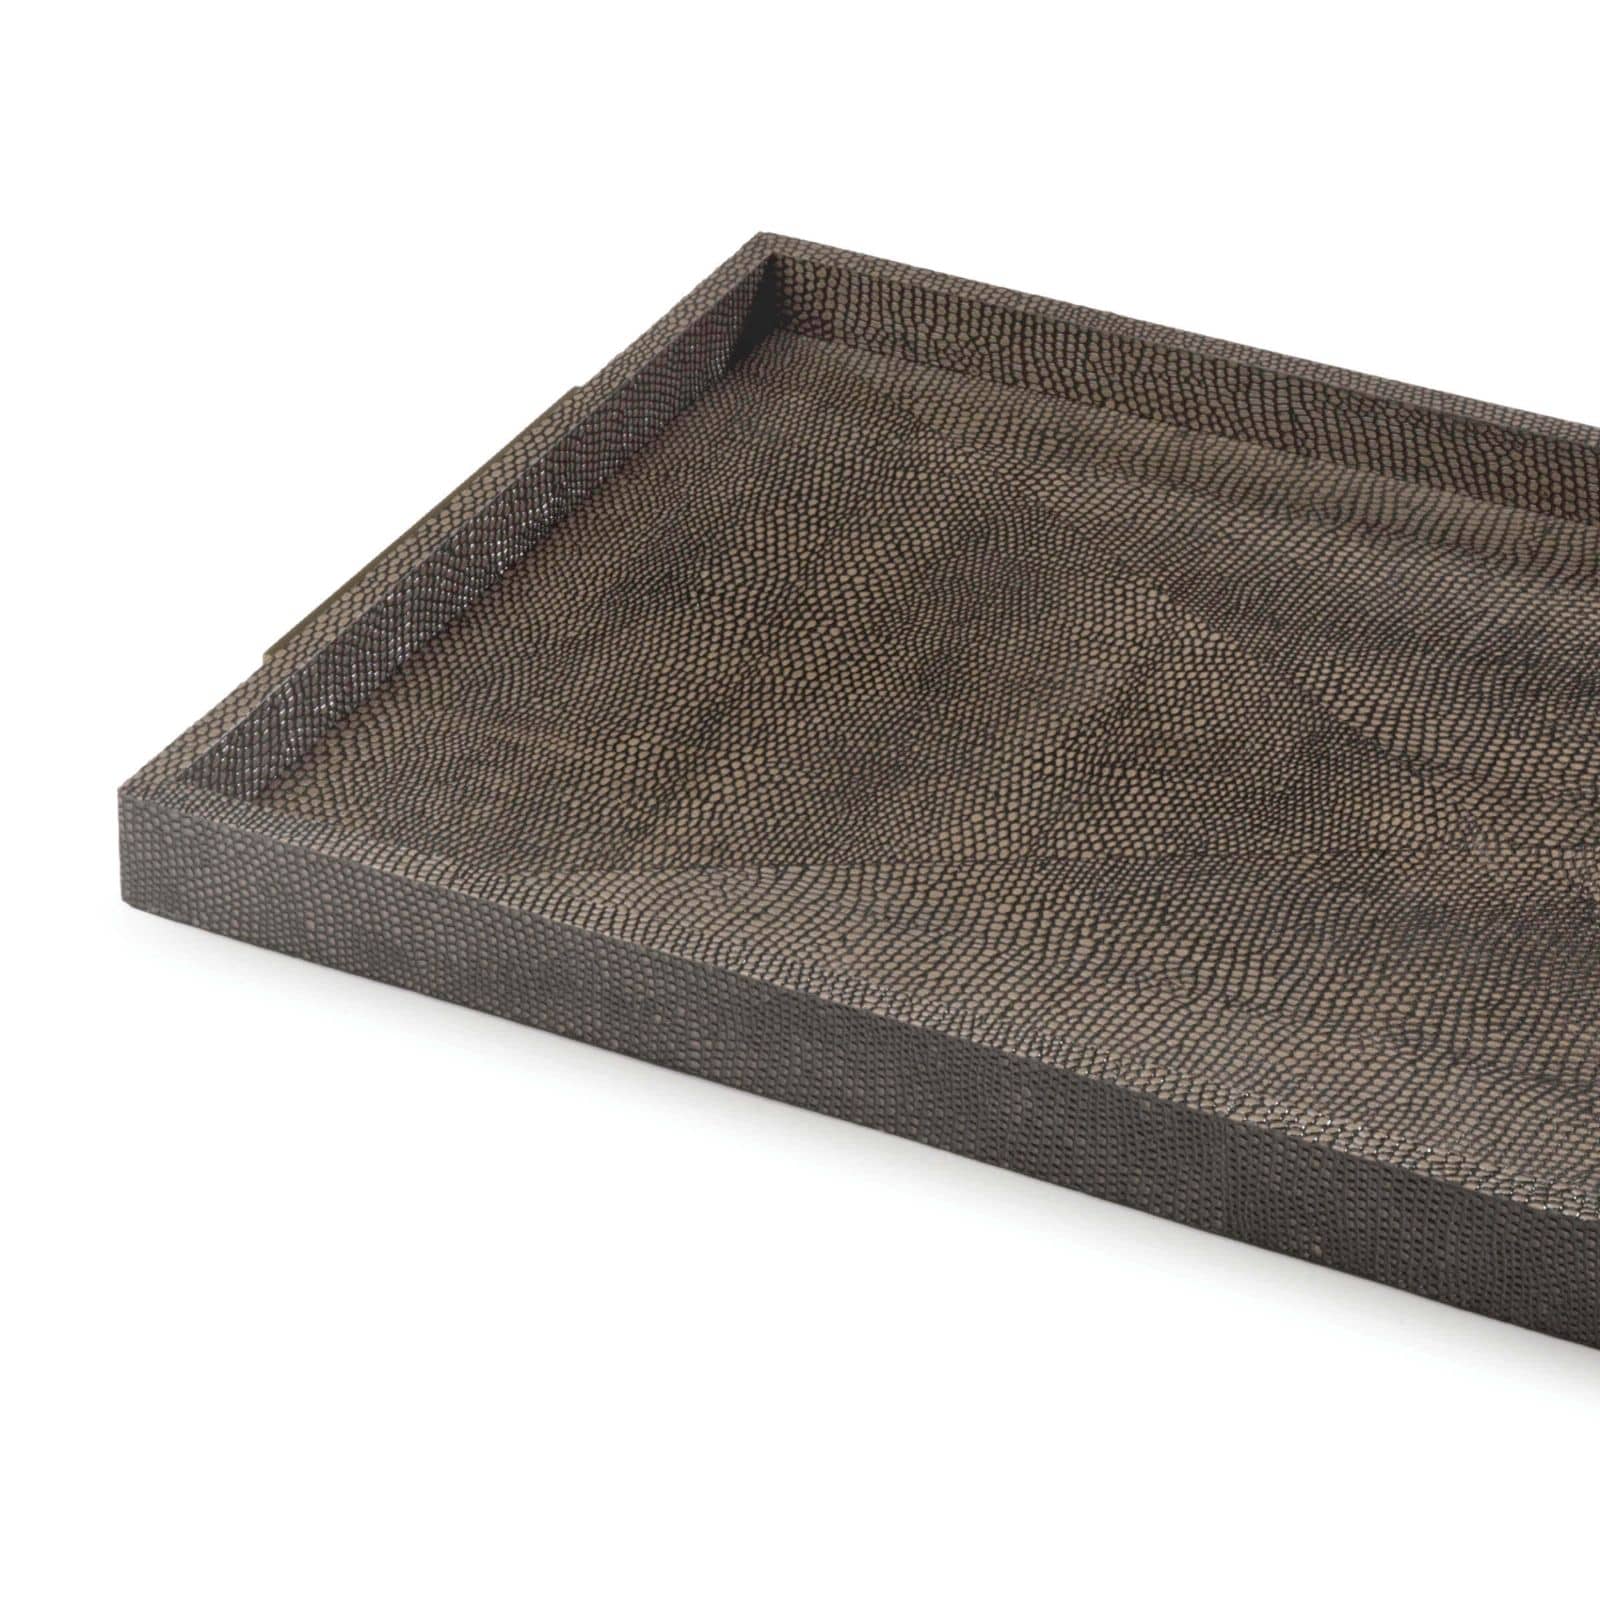 Regina Andrew Rectangle Shagreen Boutique Tray in Vintage Brown Snake